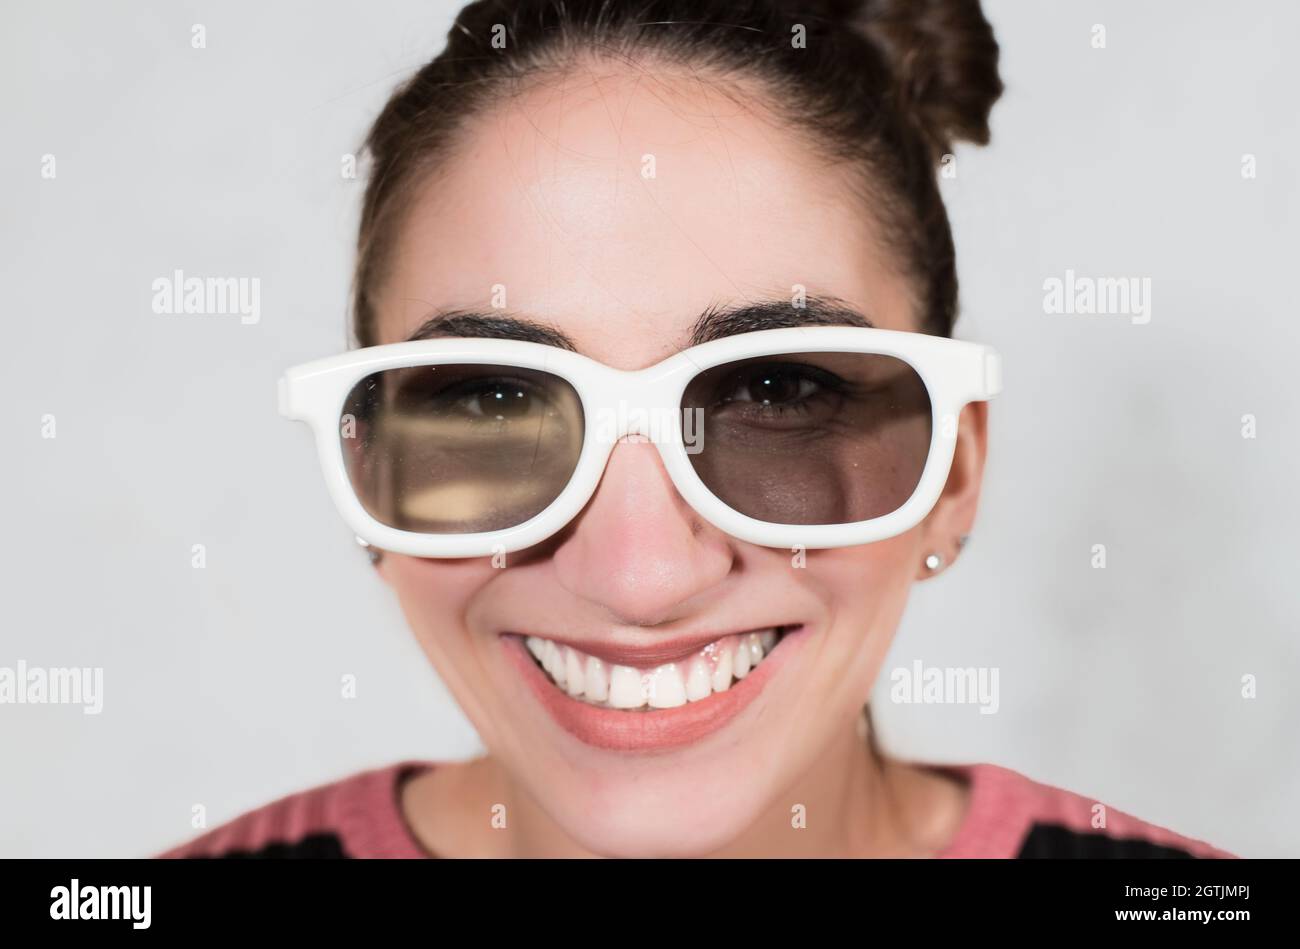 Portrait Of Smiling Young Woman Wearing Sunglasses Against White Background Stock Photo